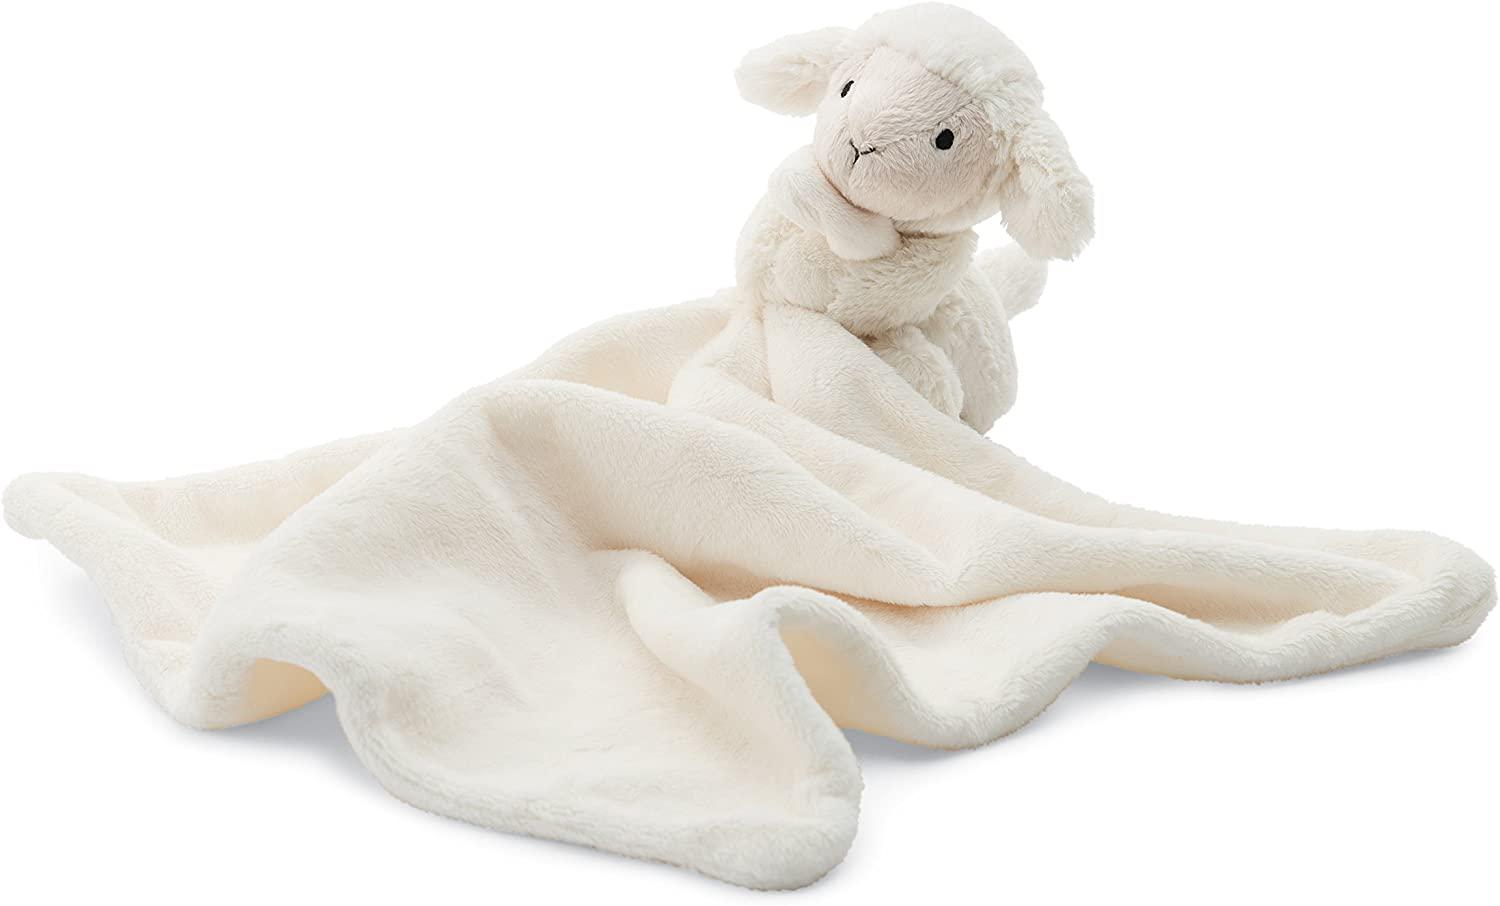 Baby Blanket With Stuffed Animal Attached